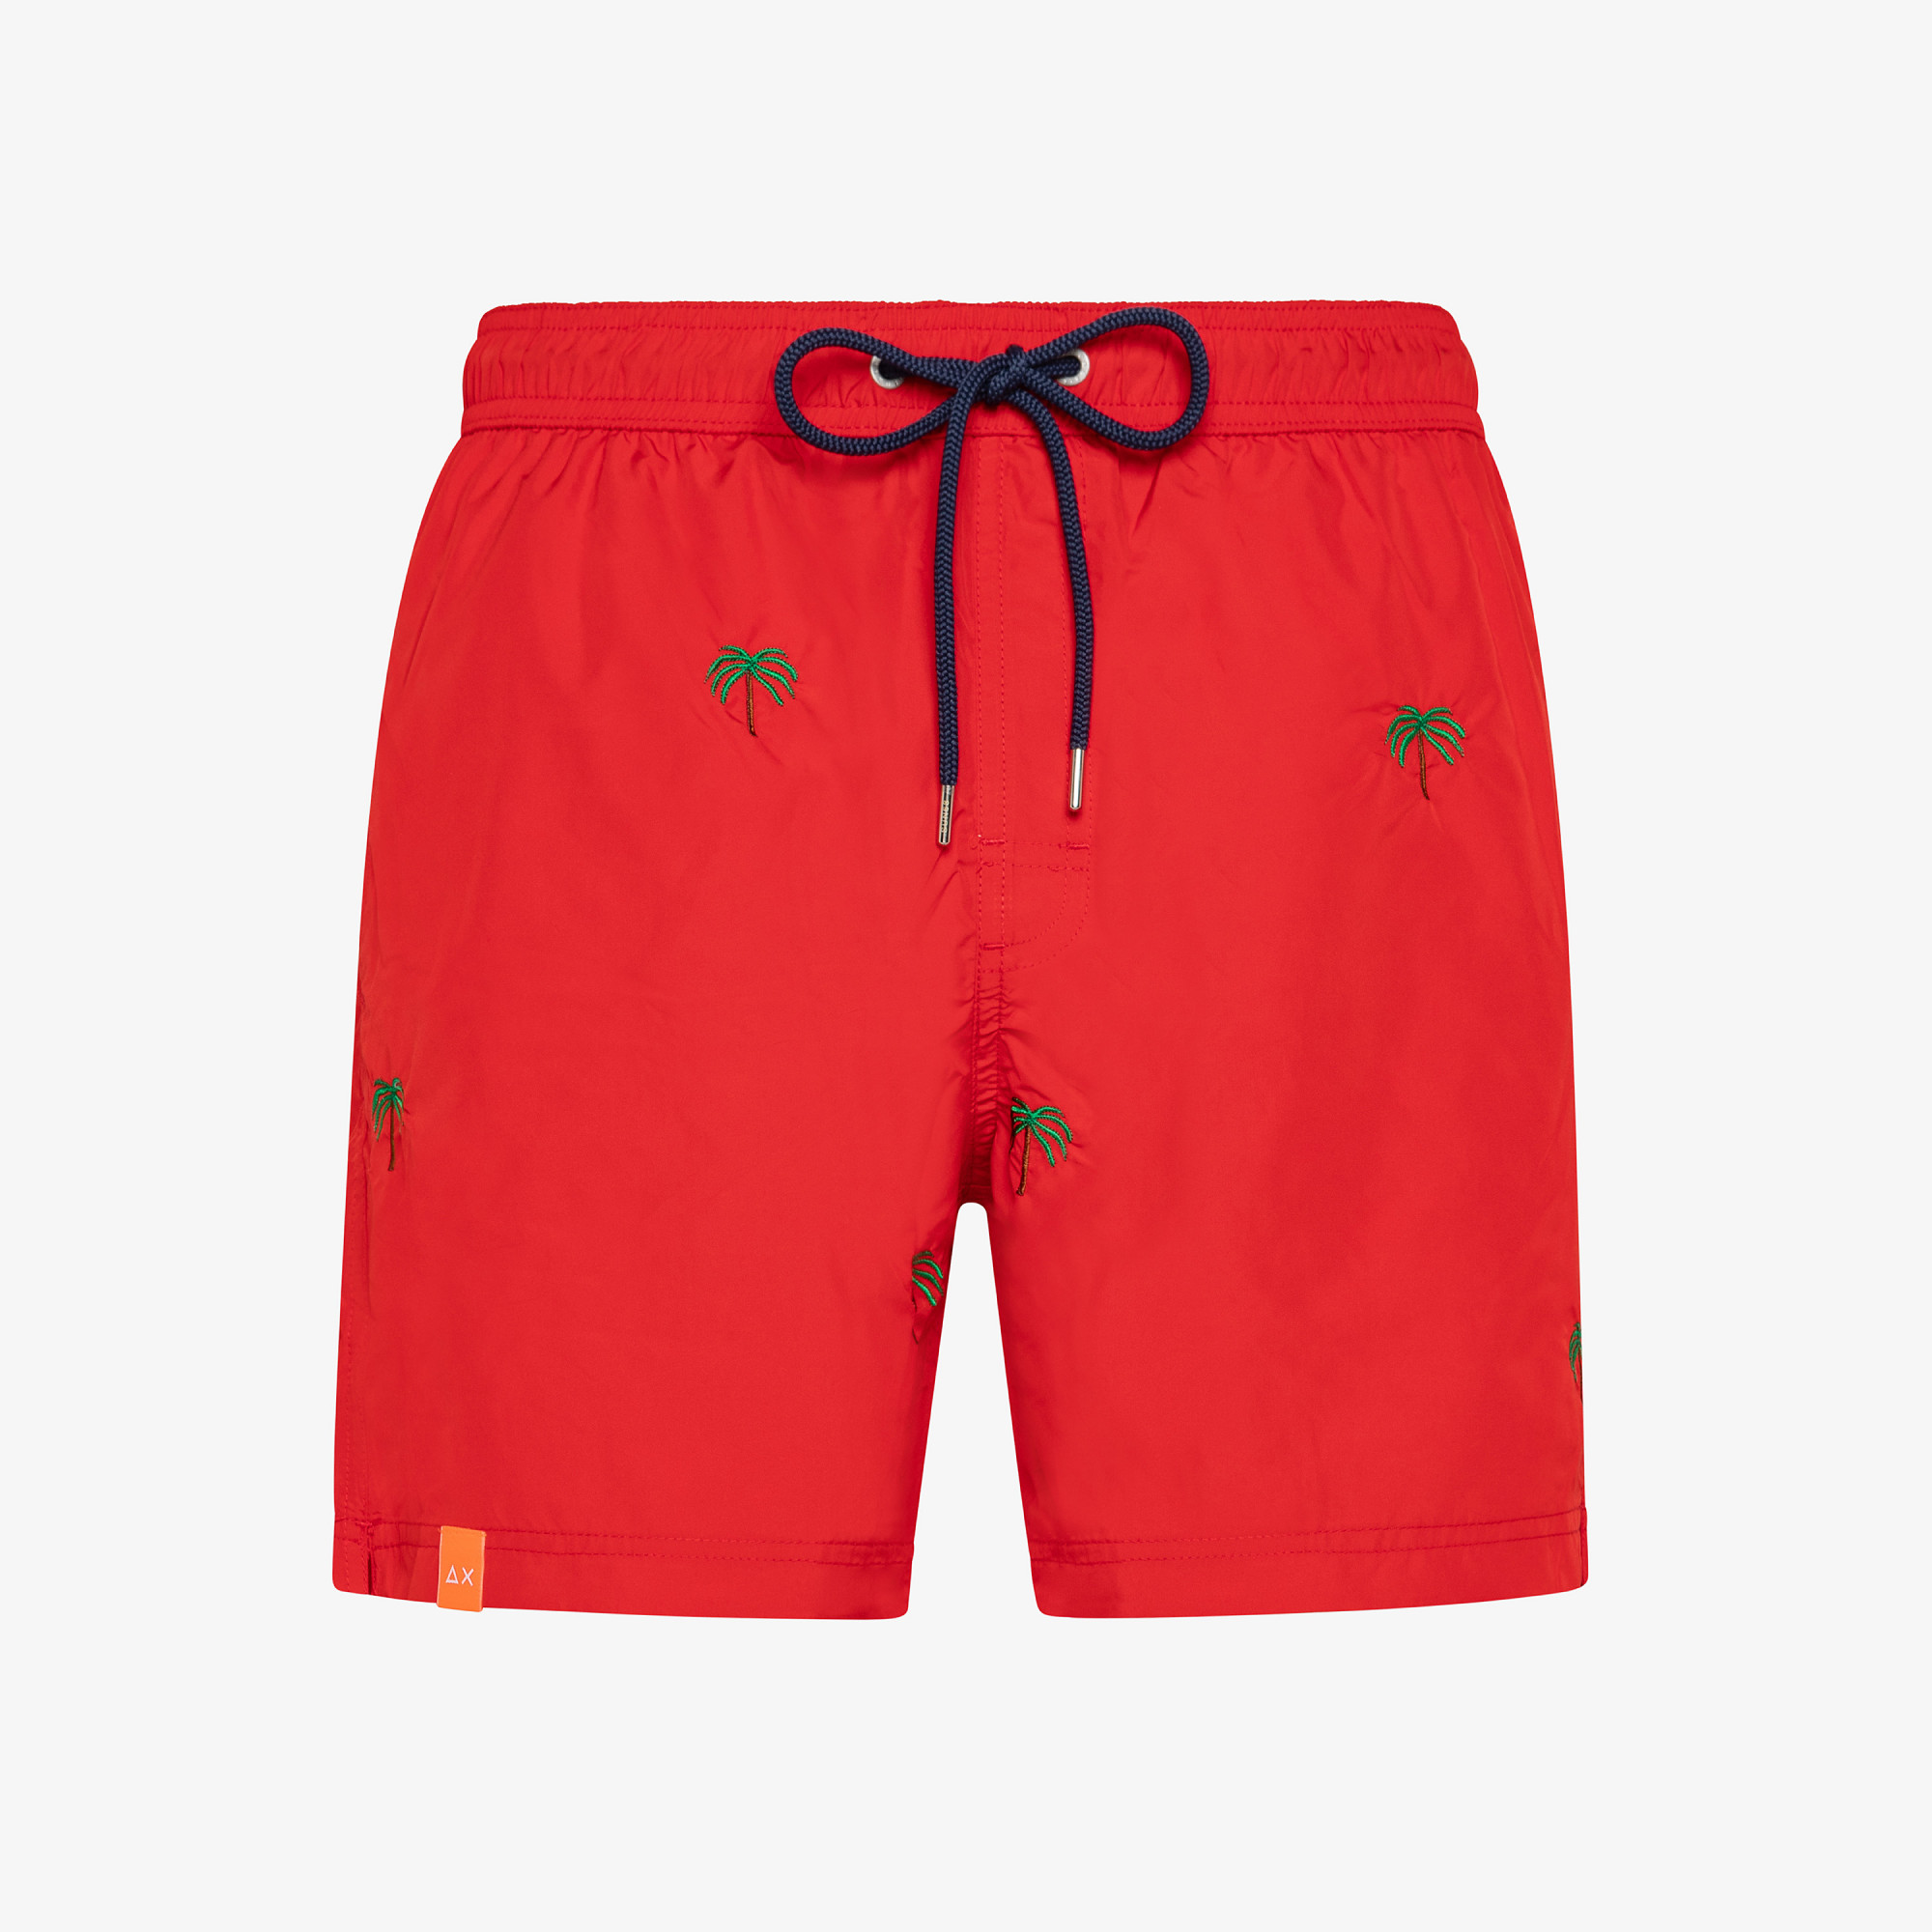 SWIM PANT EMBRODERY ROSSO FUOCO